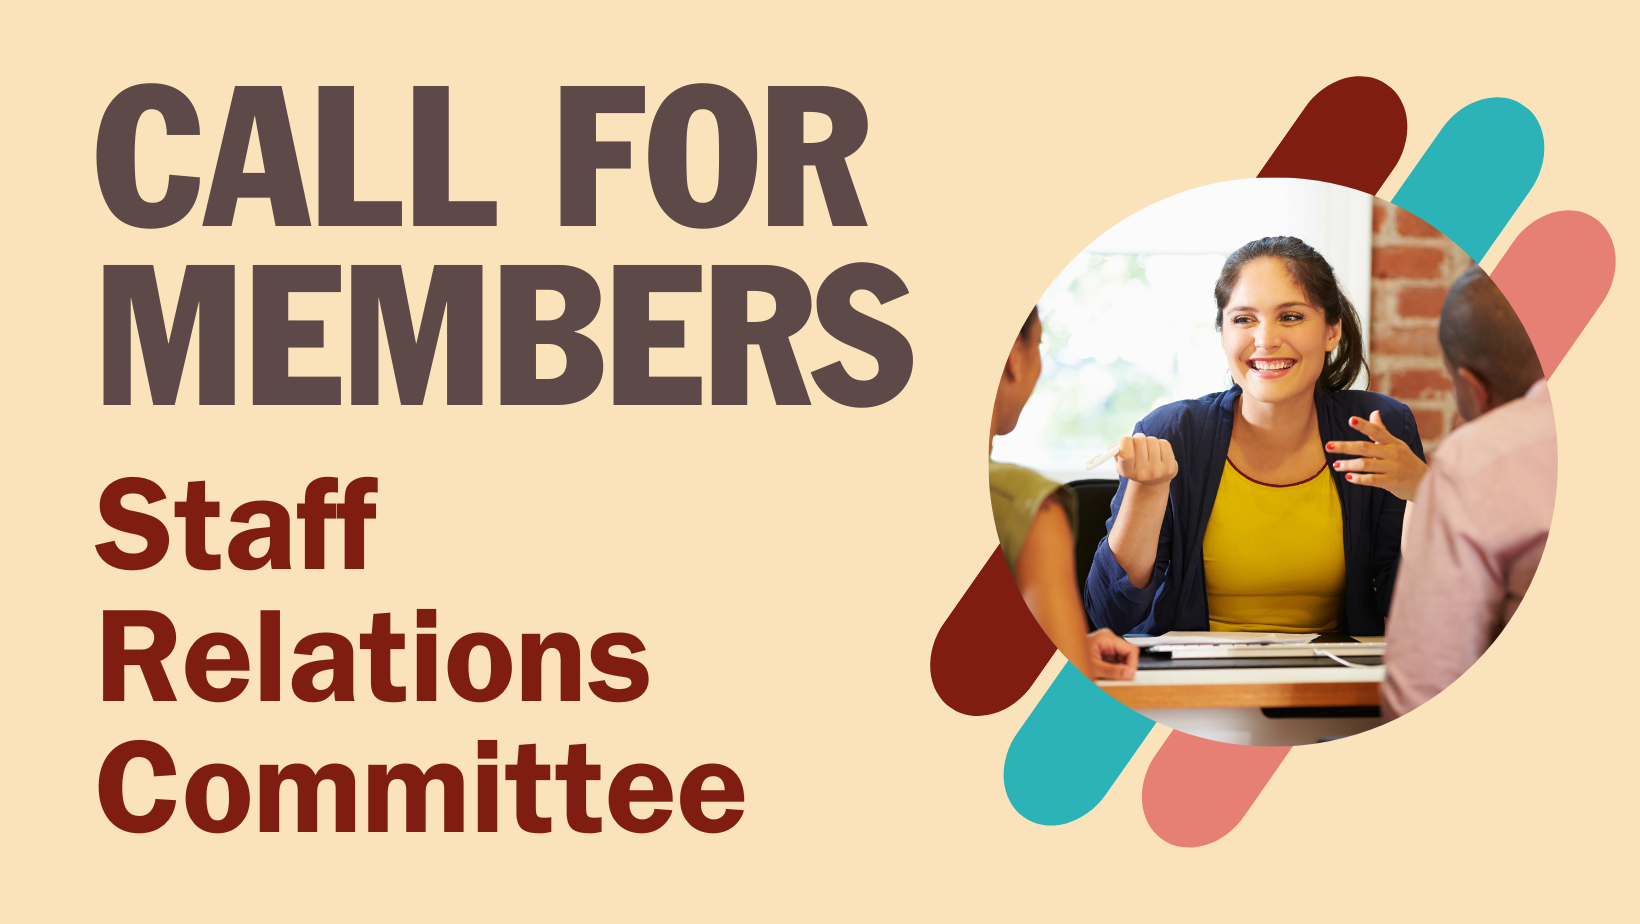 Call for members: Staff Relations Committee